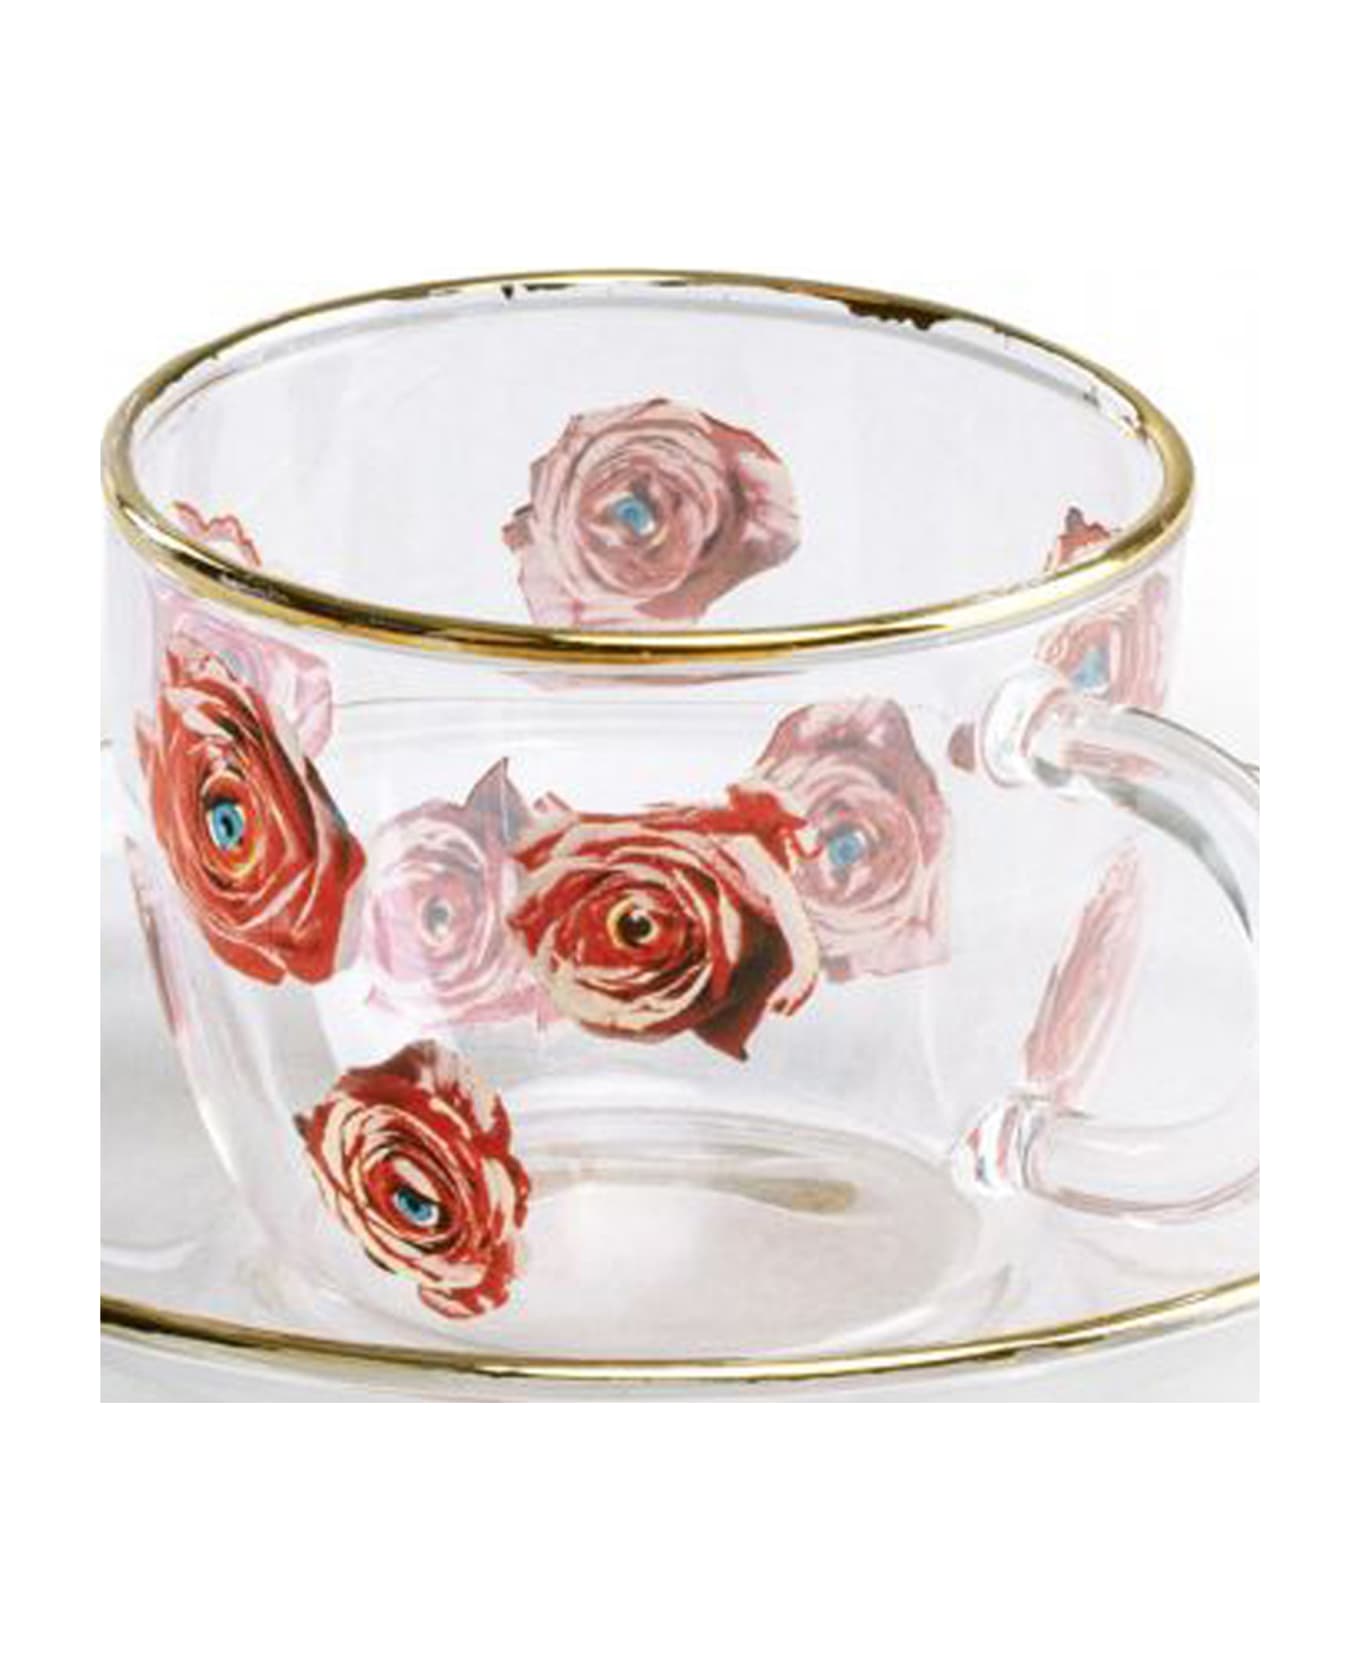 Seletti 'roses' Coffee Cup And Plate - Transparent